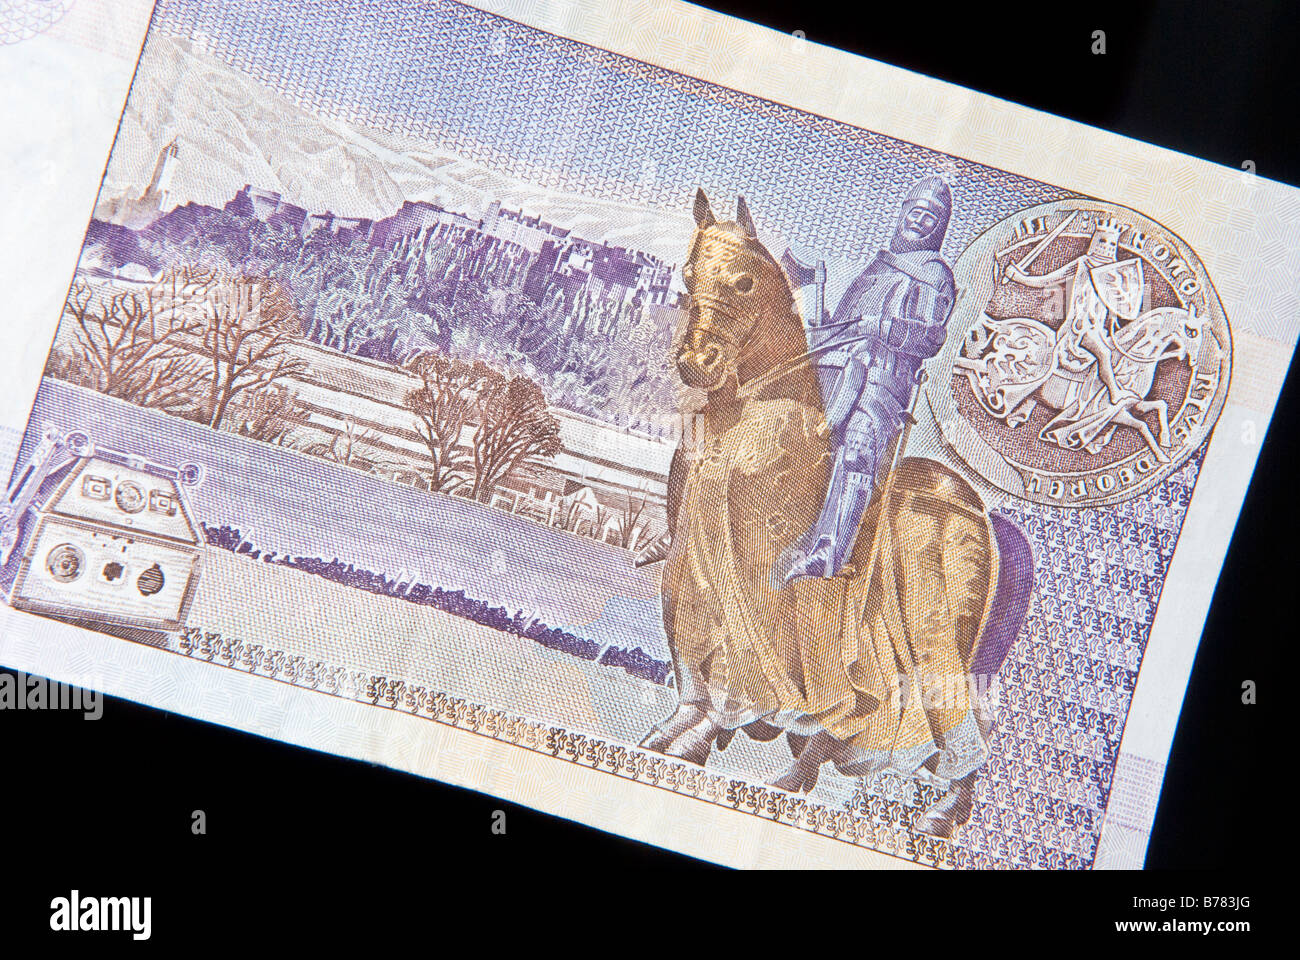 Clydesdale Bank (Scotland) £20 note - reverse side. Stock Photo